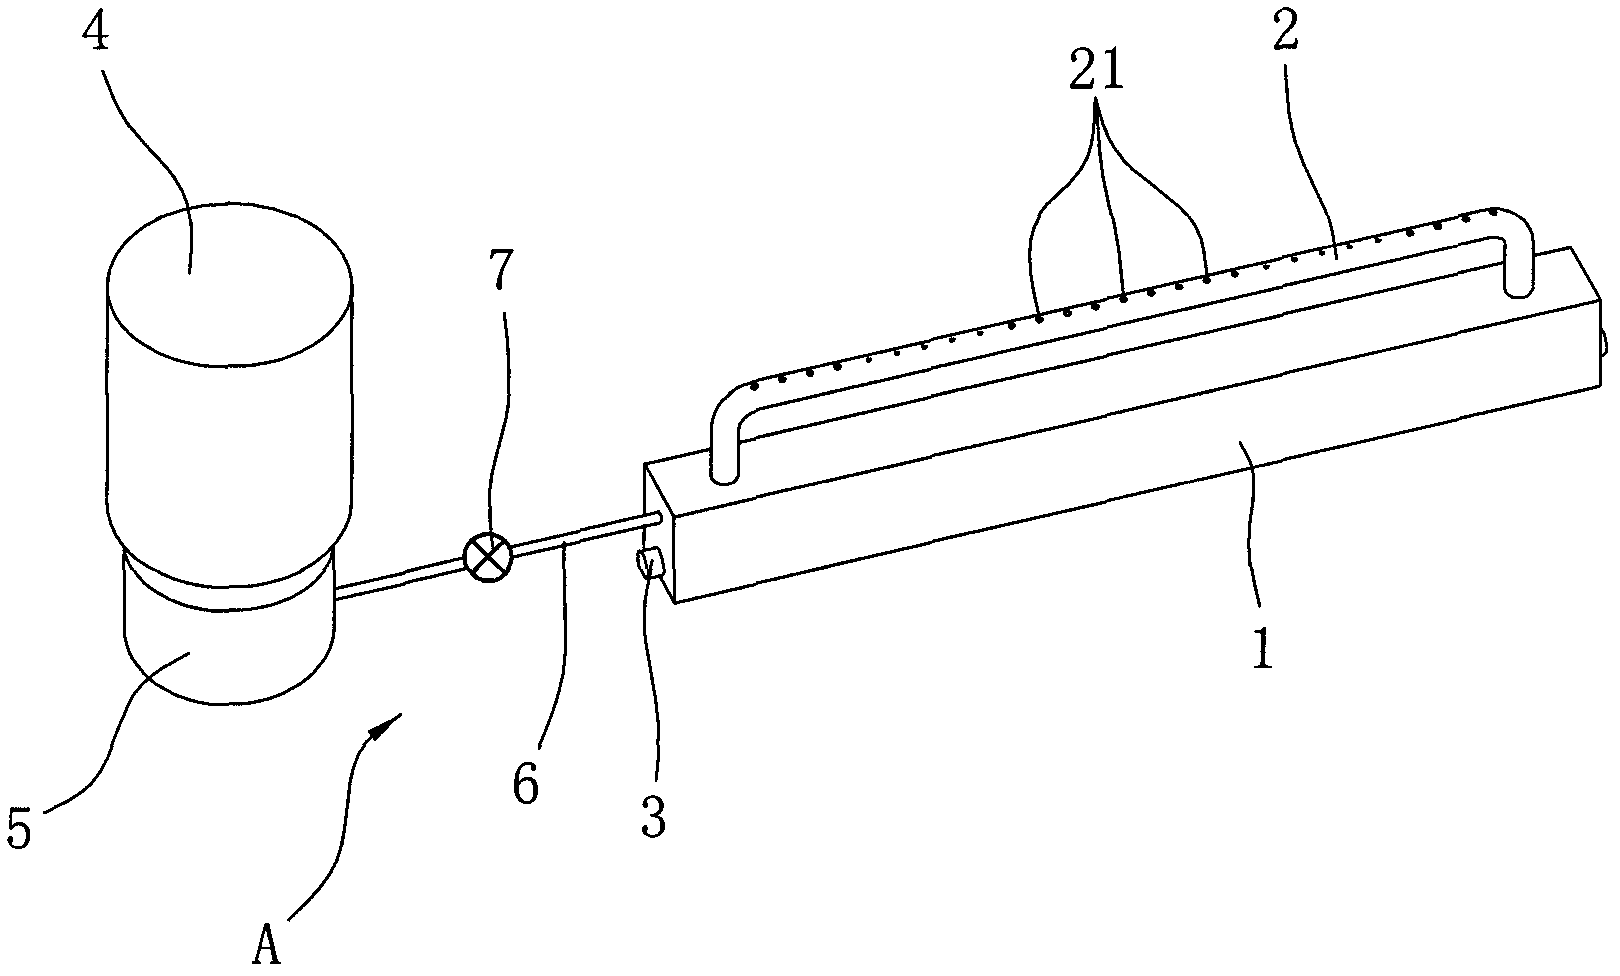 Gasifying combustion device for liquid fuel